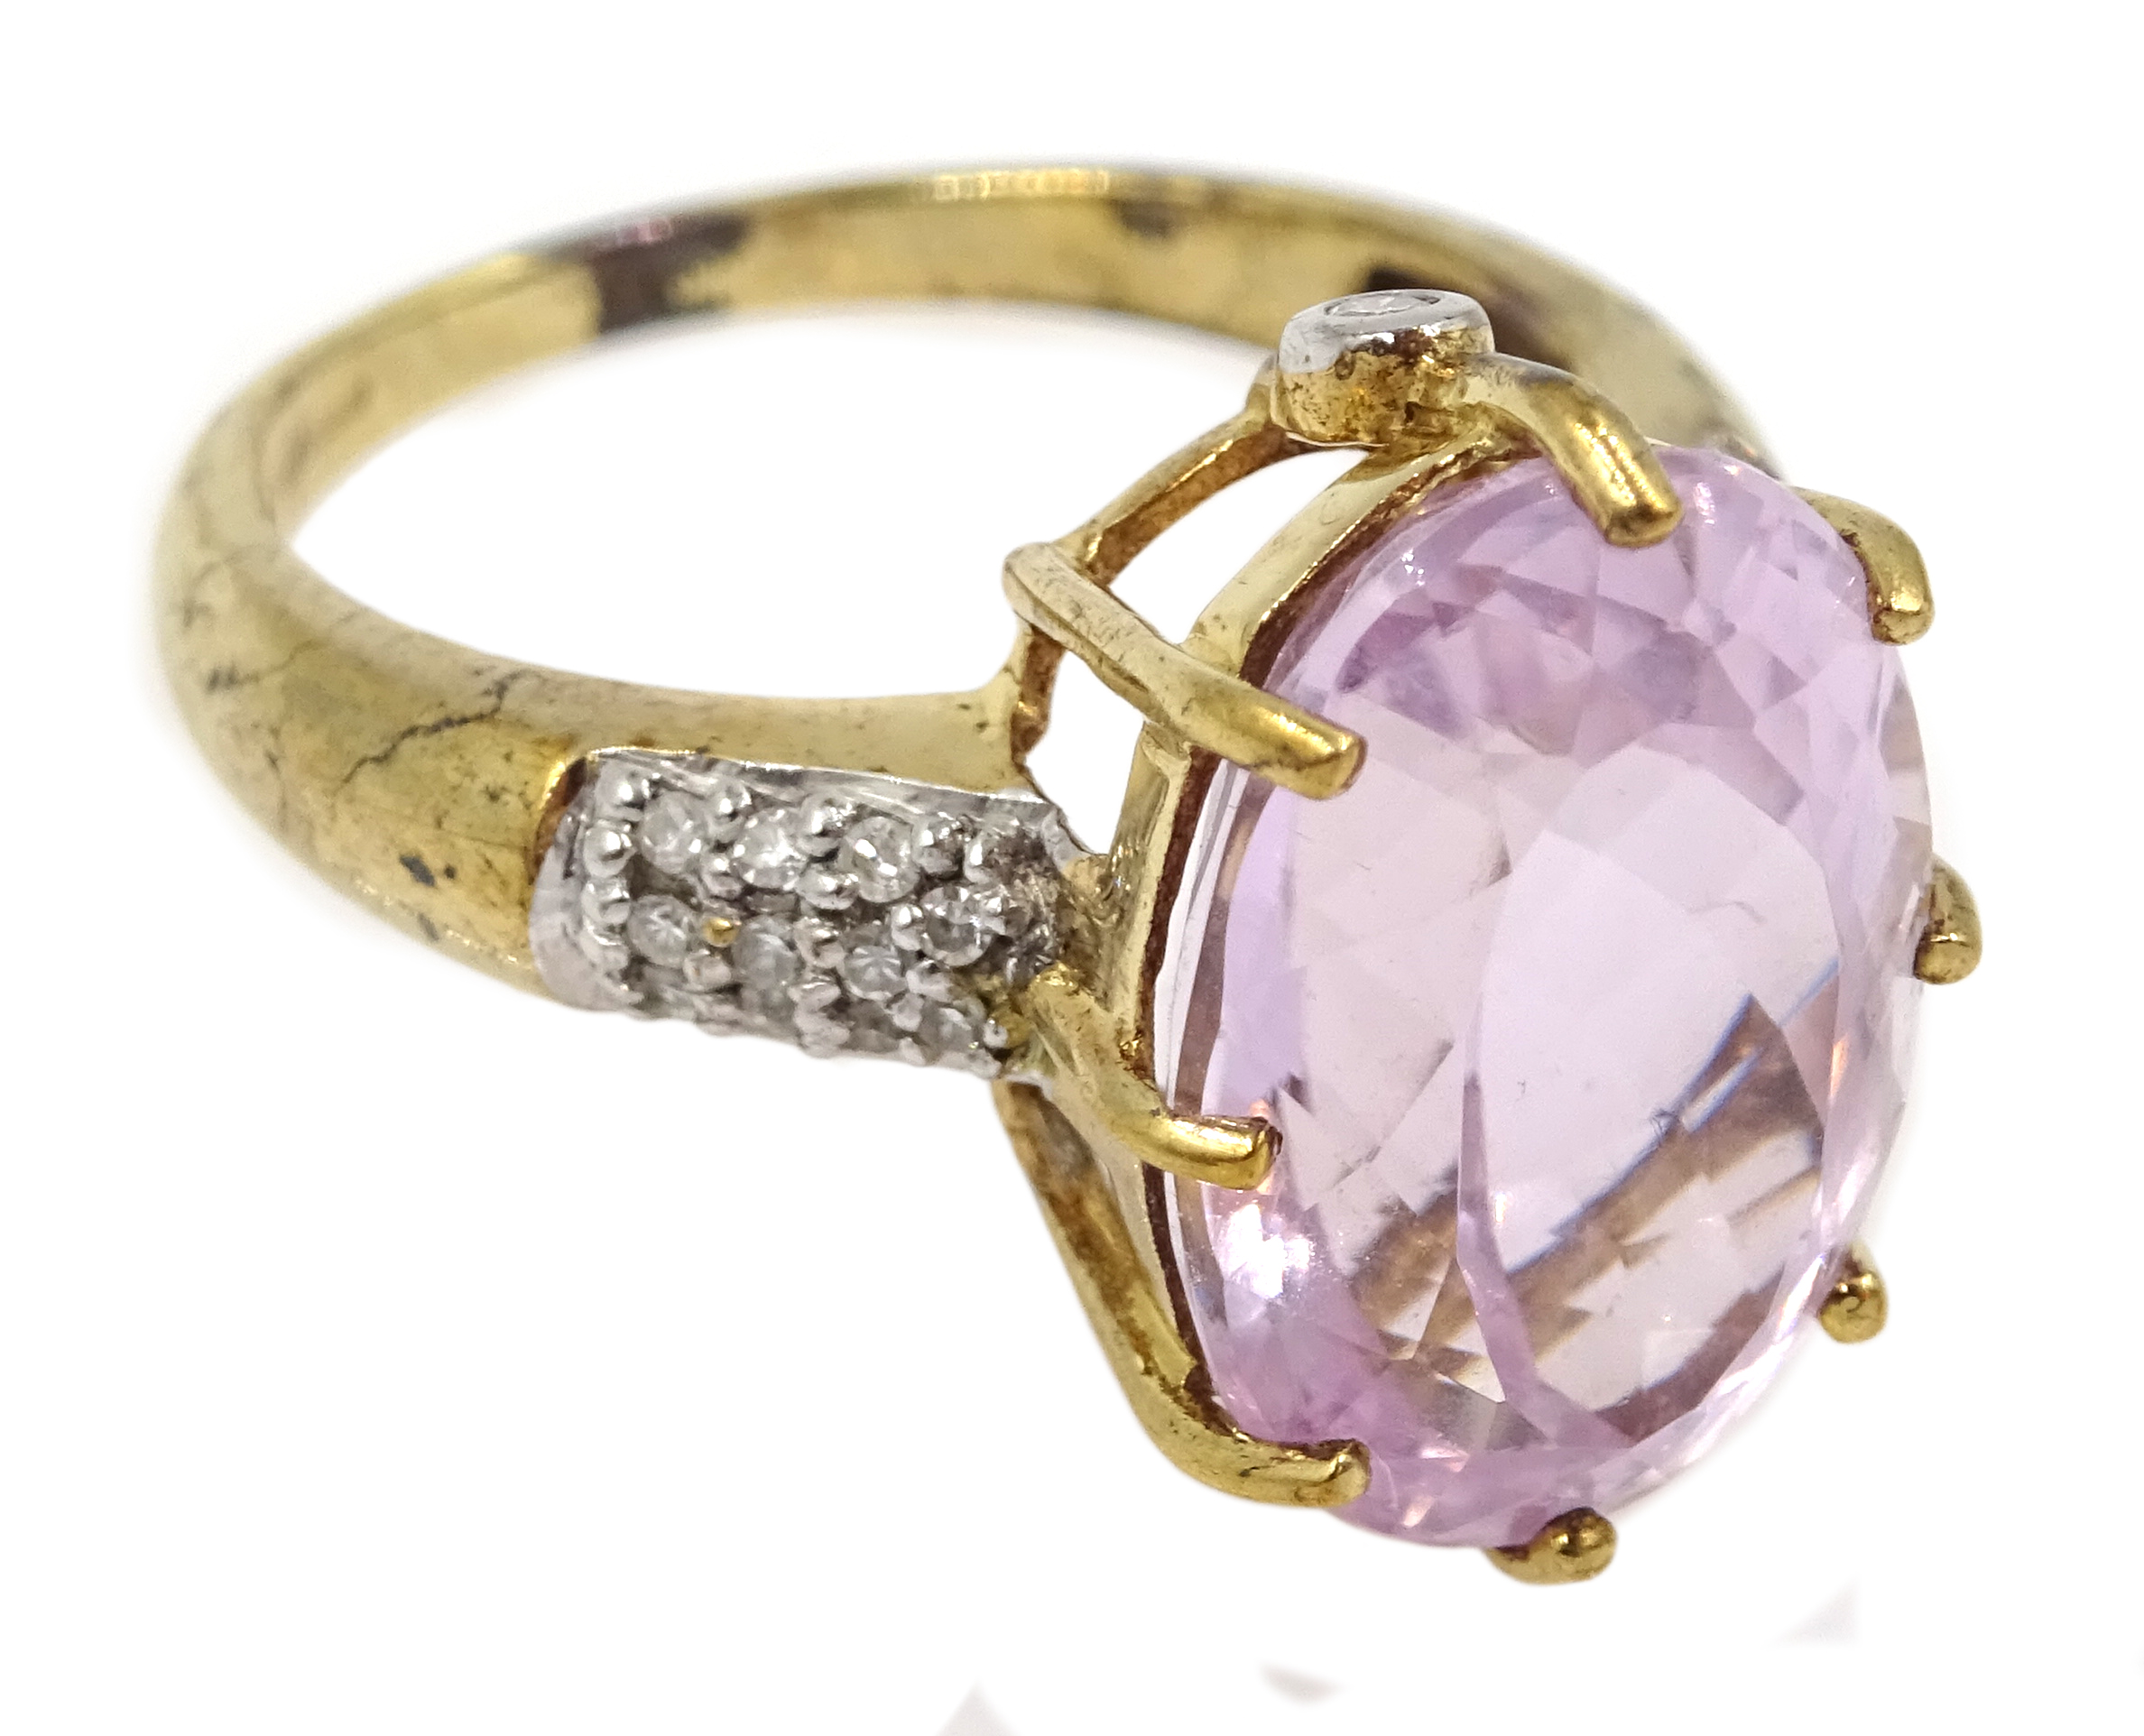 9ct gold oval kunzite ring with diamond set shoulders and gallery, hallmarked - Image 2 of 3